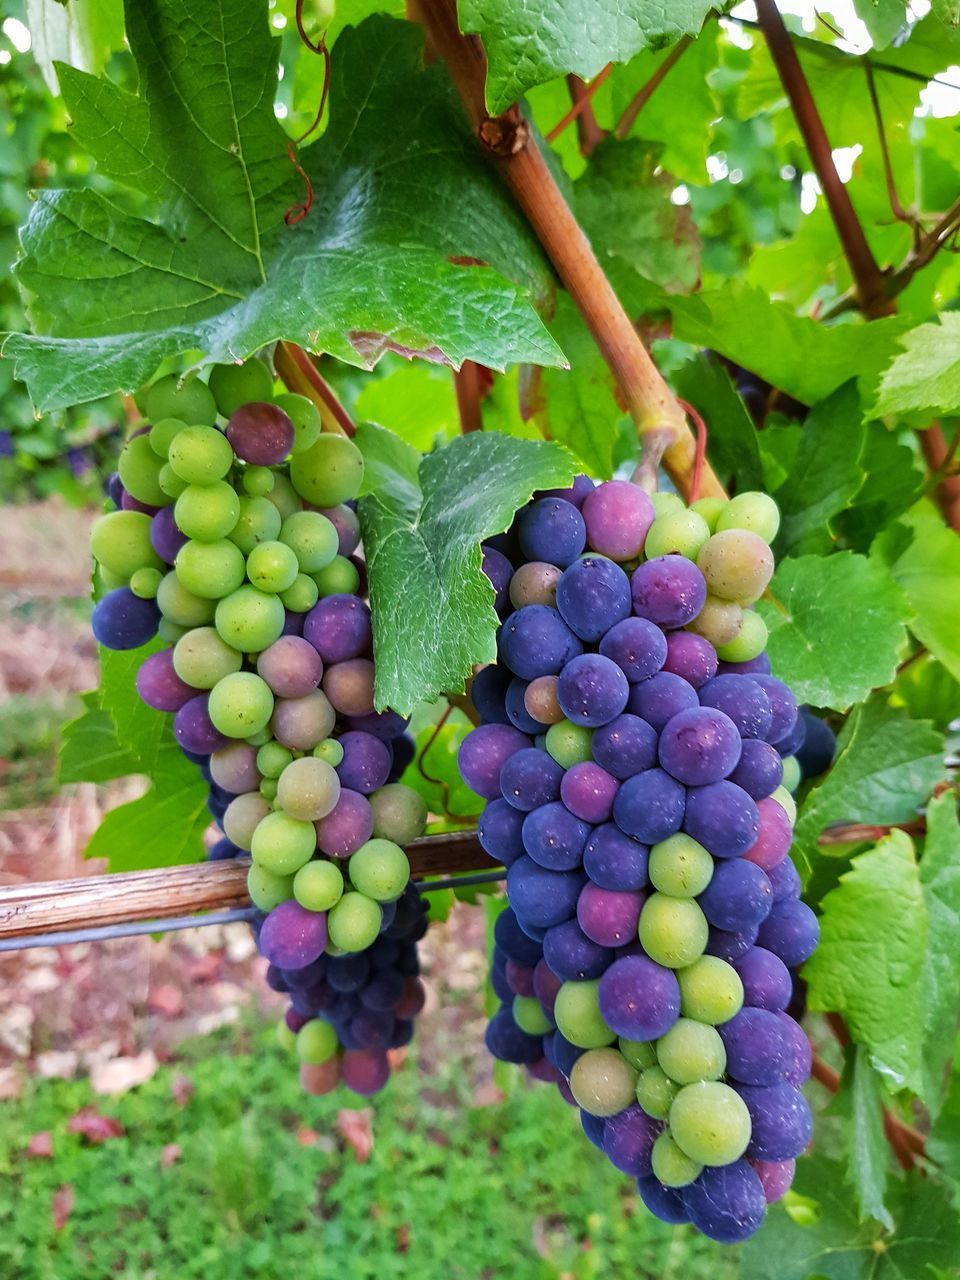 CLOSE-UP OF GRAPES HANGING ON VINE